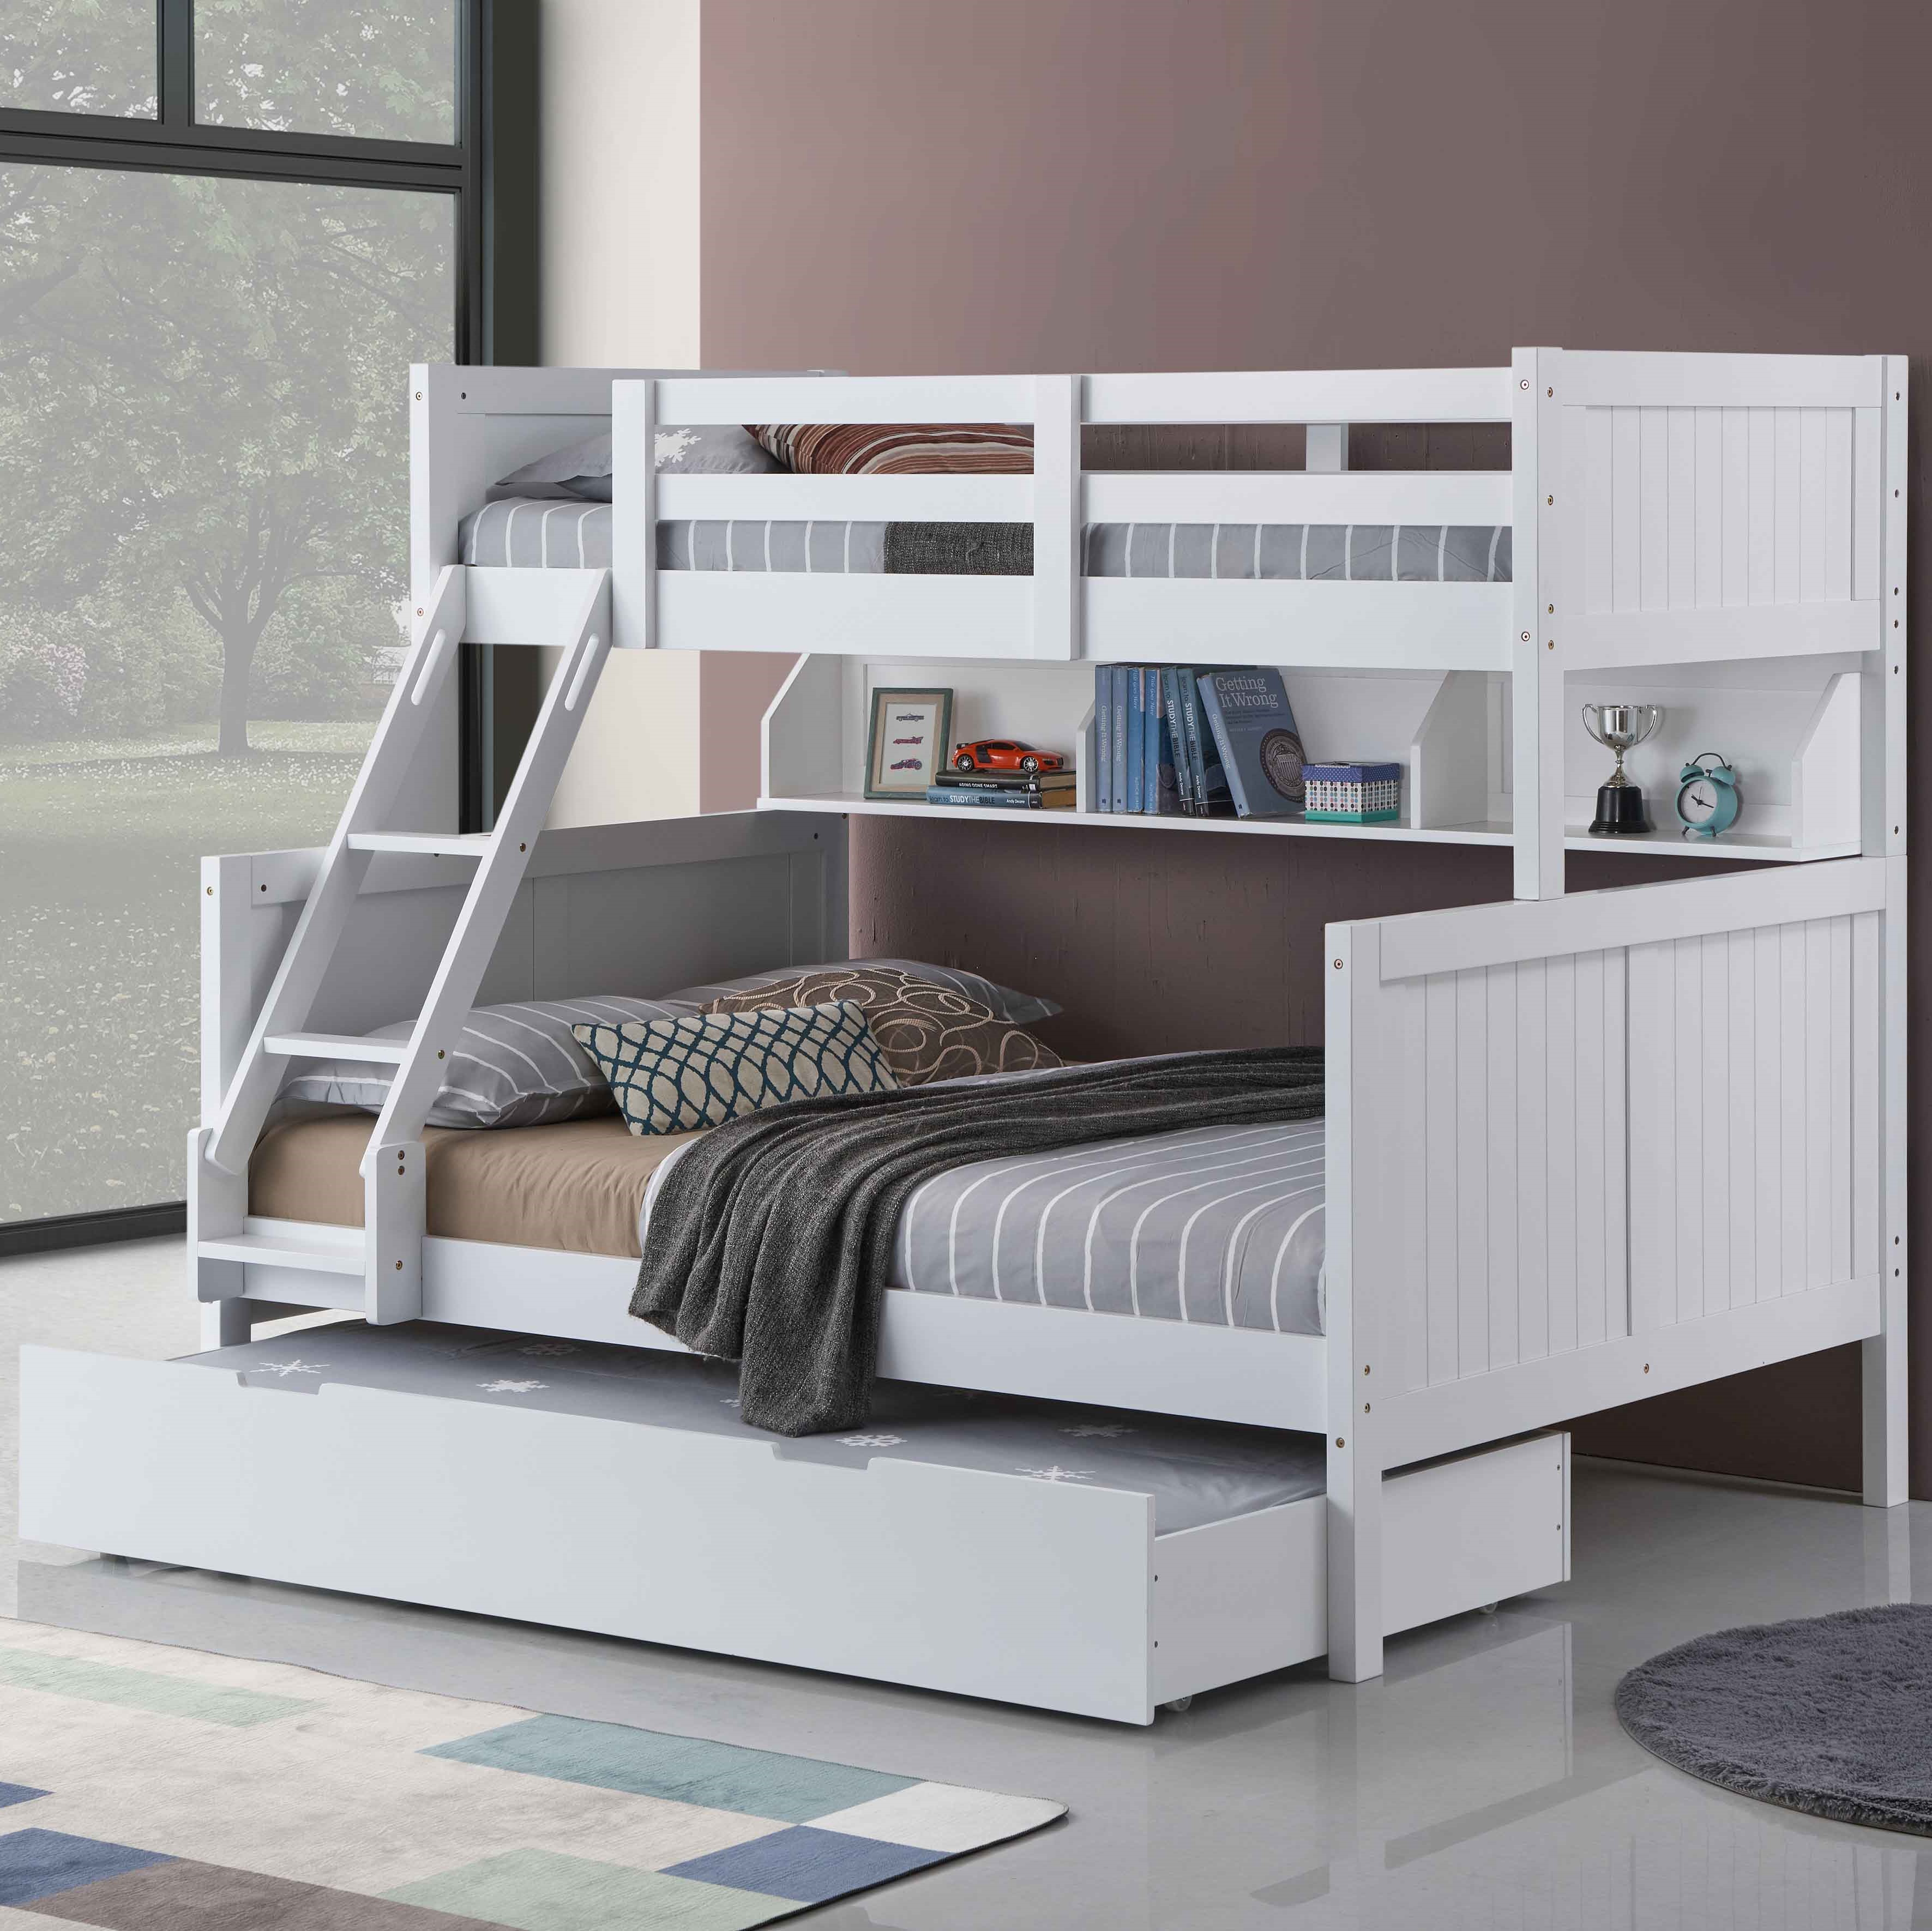 Double Bunk Bed Storage Trundle, Double Bunk Beds With Mattress